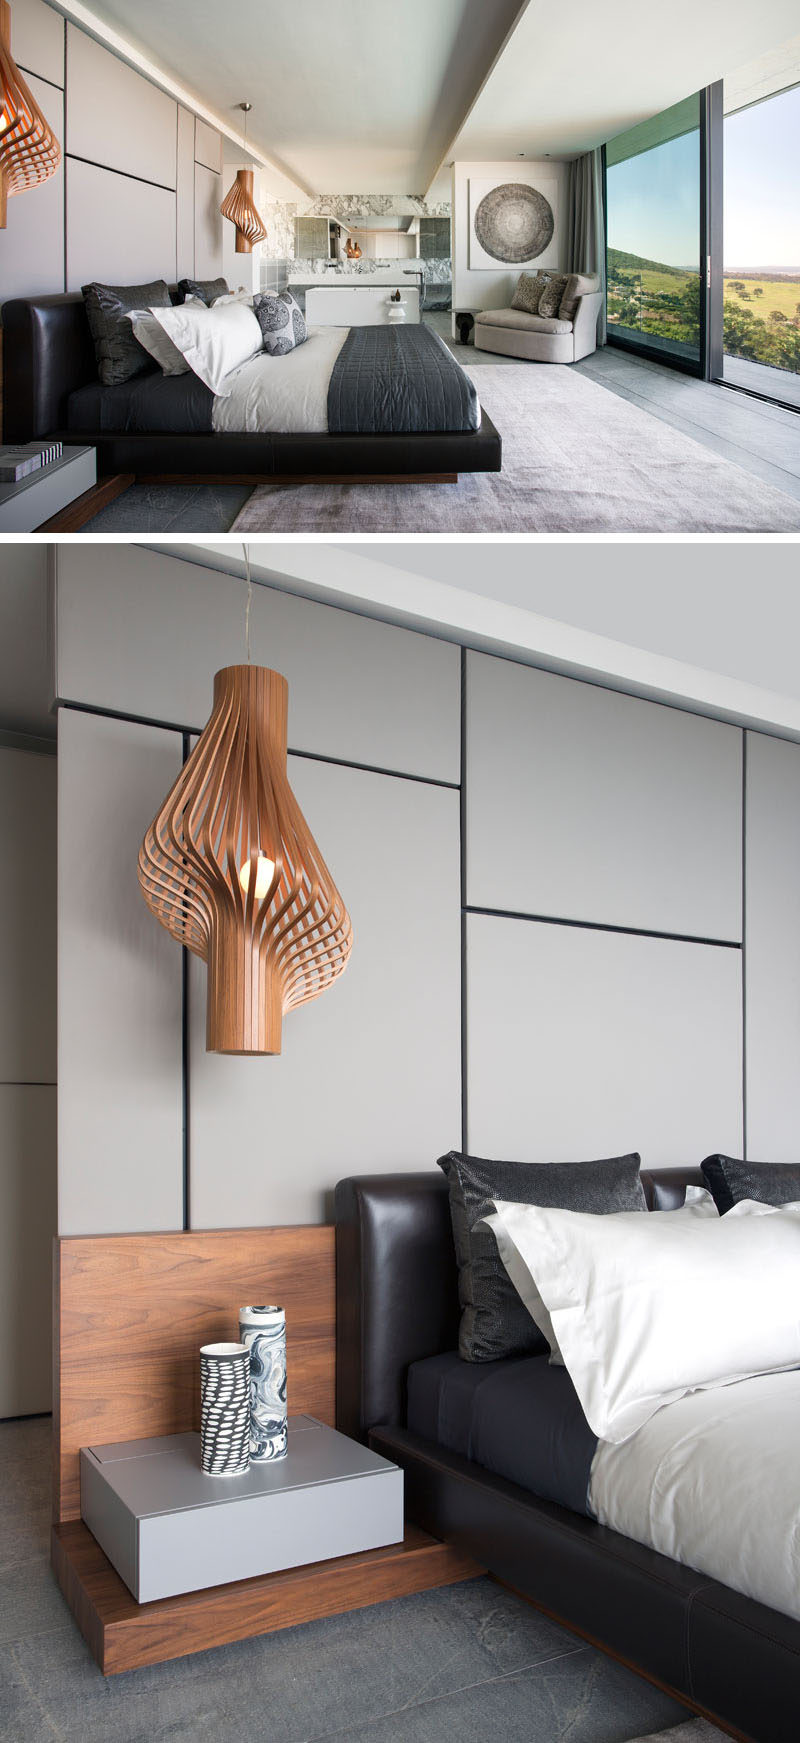 5 Things That Are HOT On Pinterest This Week | CONTEMPORIST